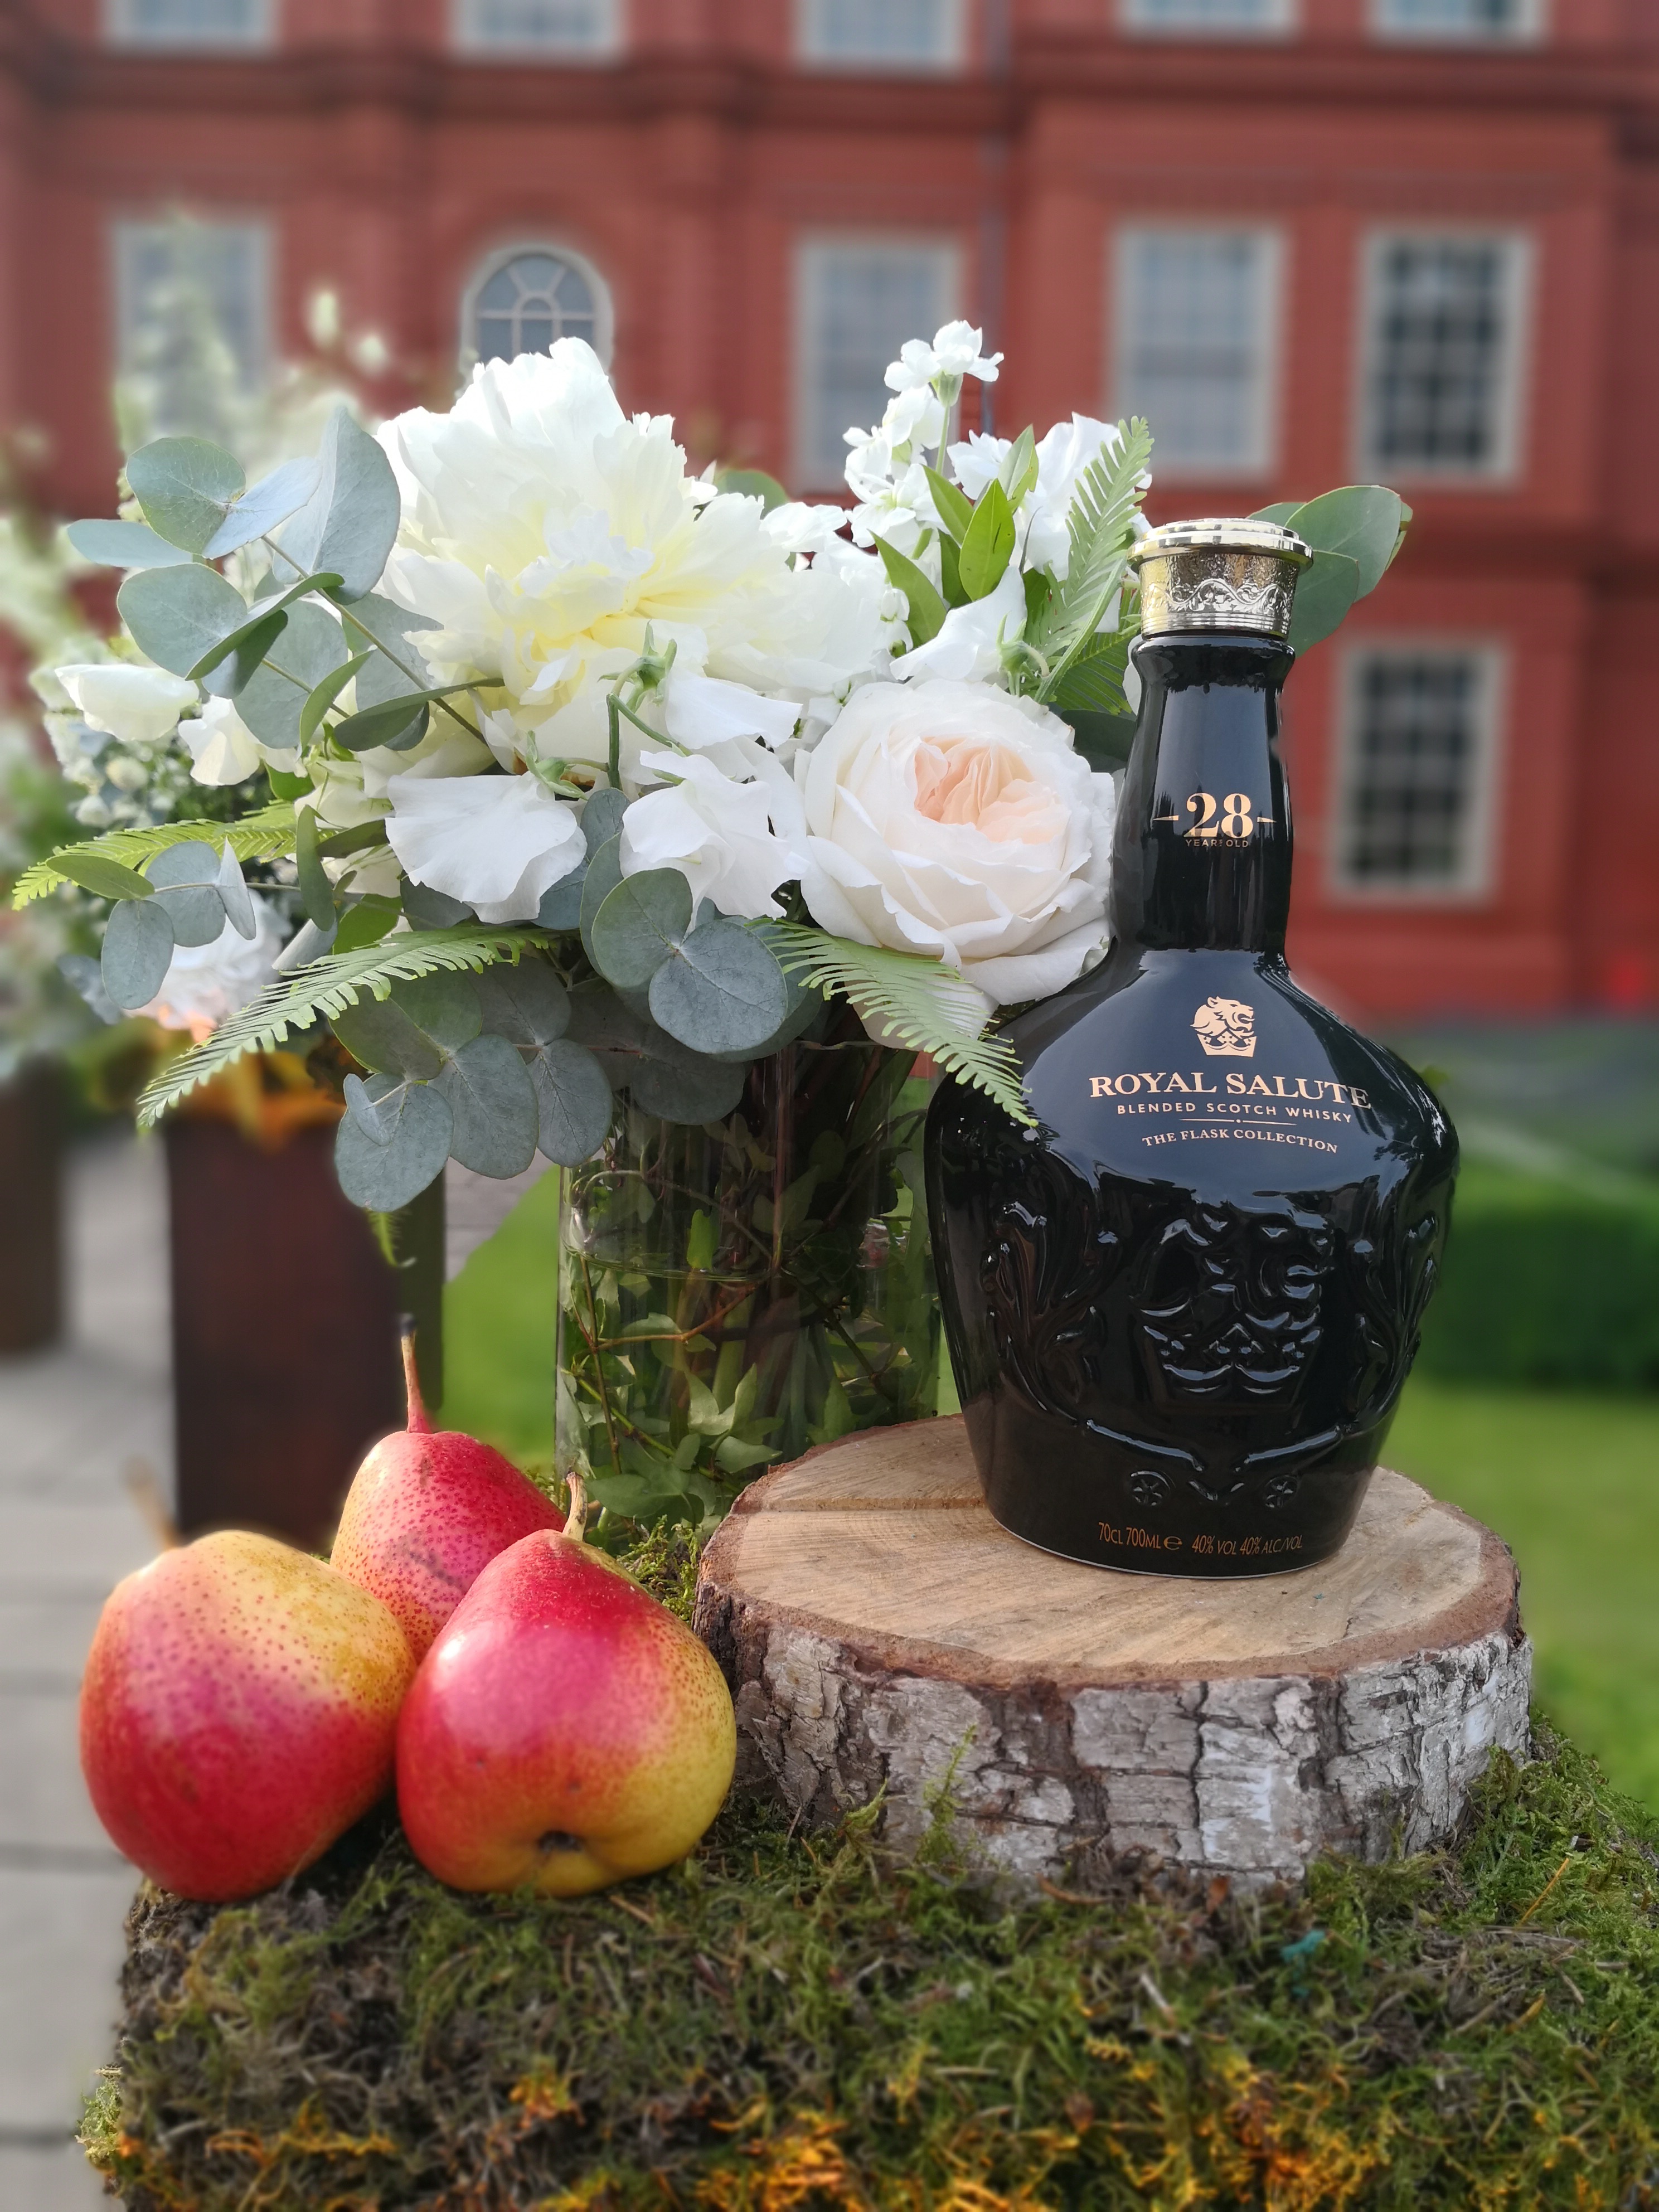 Royal Salute Launches the New 28 Year Old Kew Palace Edition